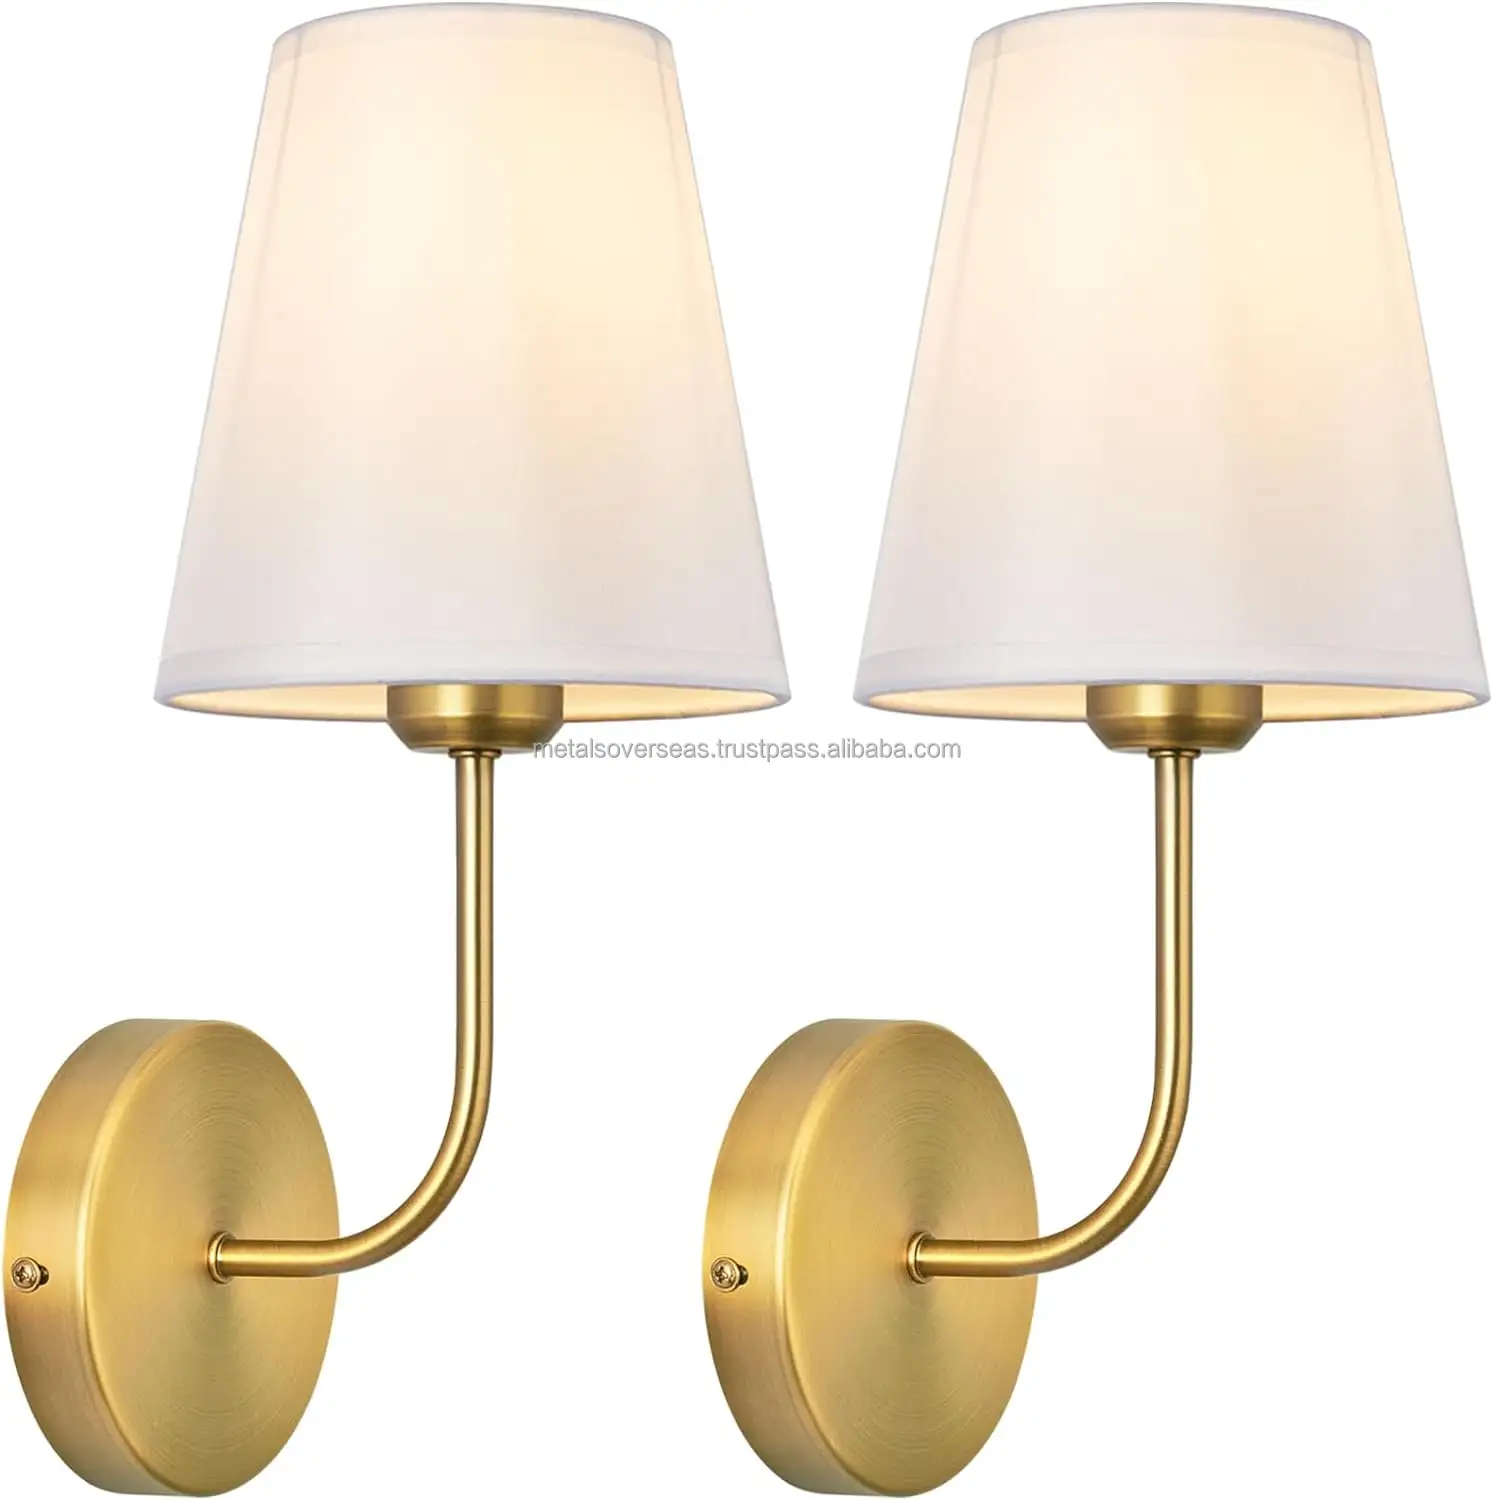 Modern Wall Sconces Set of Two 2 Pack Industrial Antique Brass Metal Sconces Wall Lighting with White Fabric Lampshade